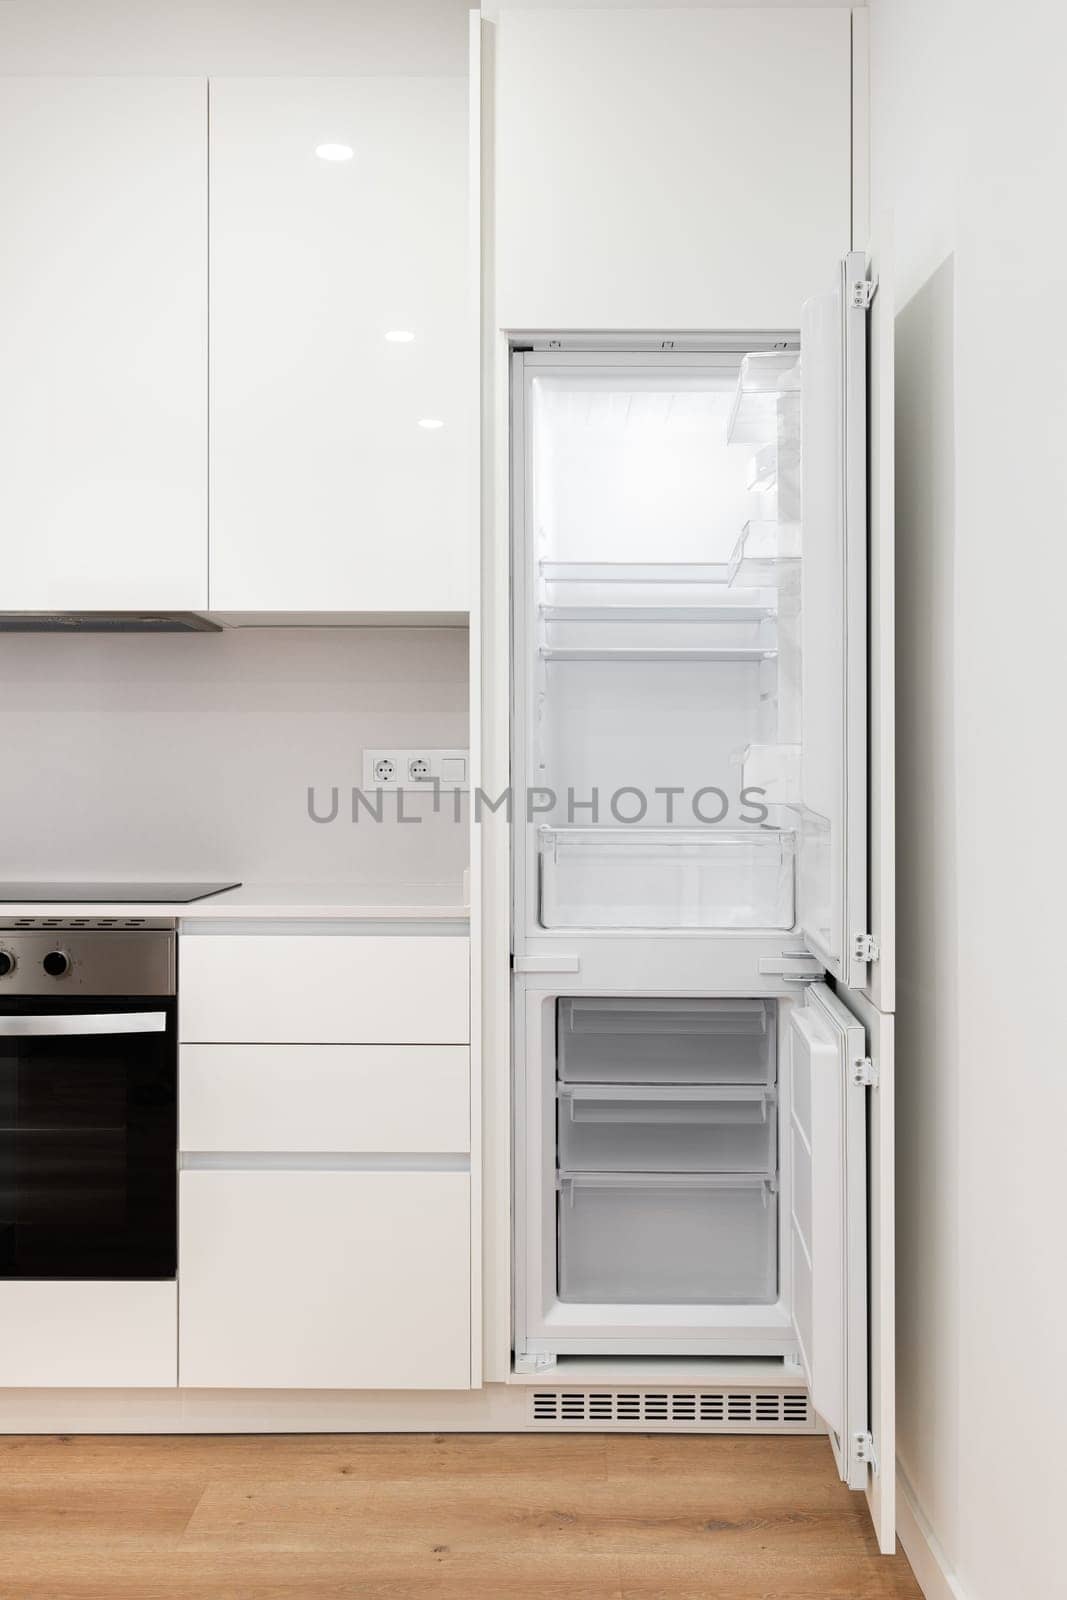 Photo of a modern kitchen with sleek white cabinets and empty refrigerator and freezer with doors open by apavlin